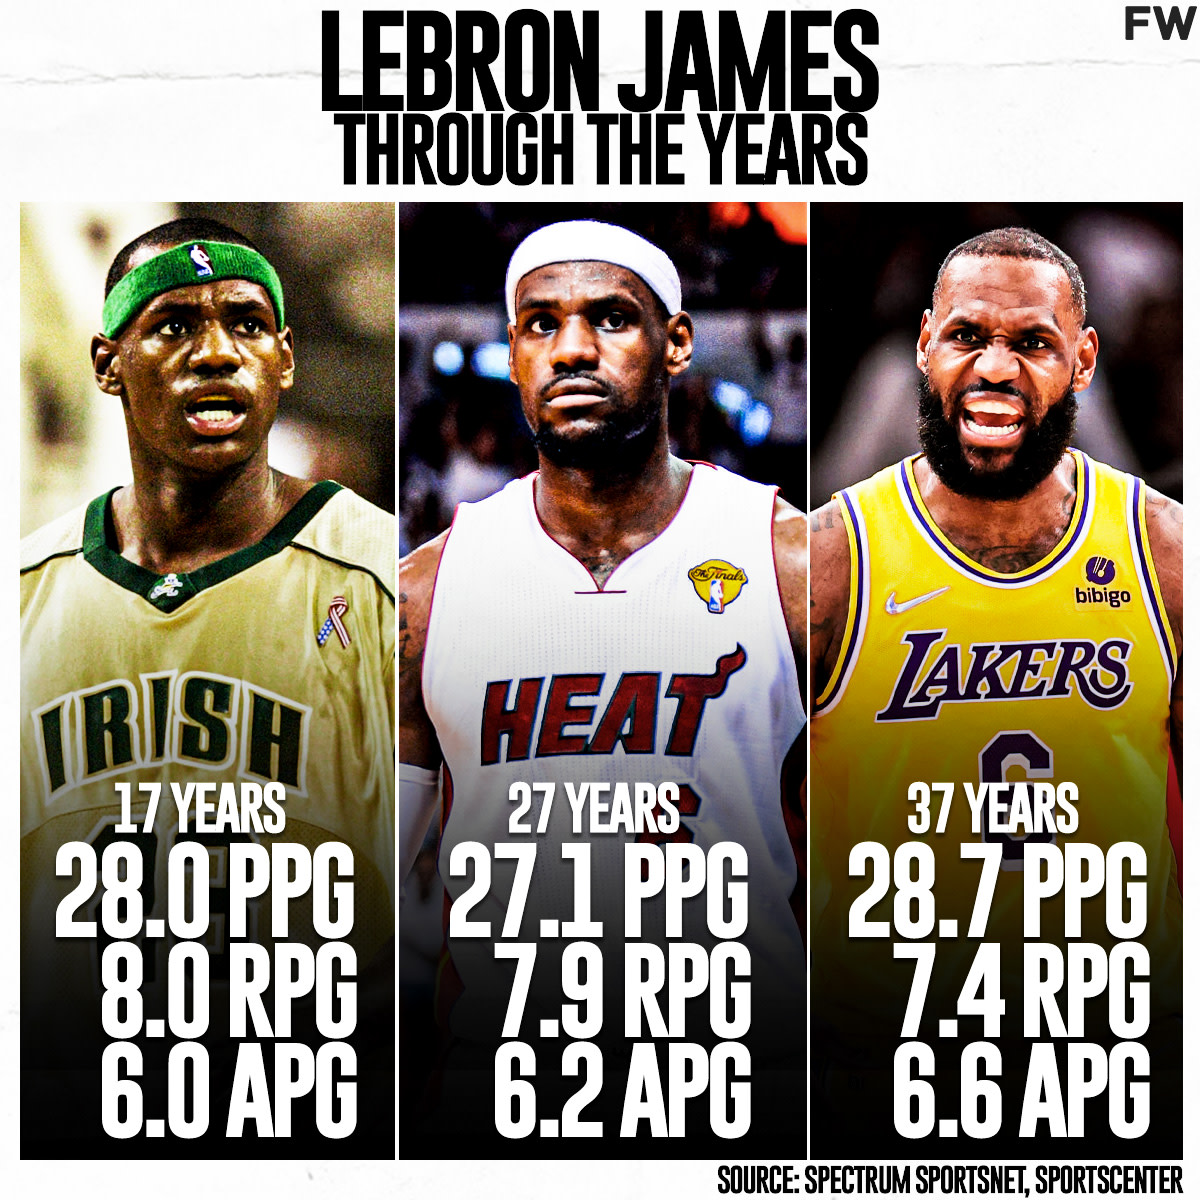 LeBron James' Stats This Season Compared To 2012 And 2003 Seasons Highlight His Incredible Dominance Over Last 2 Decades